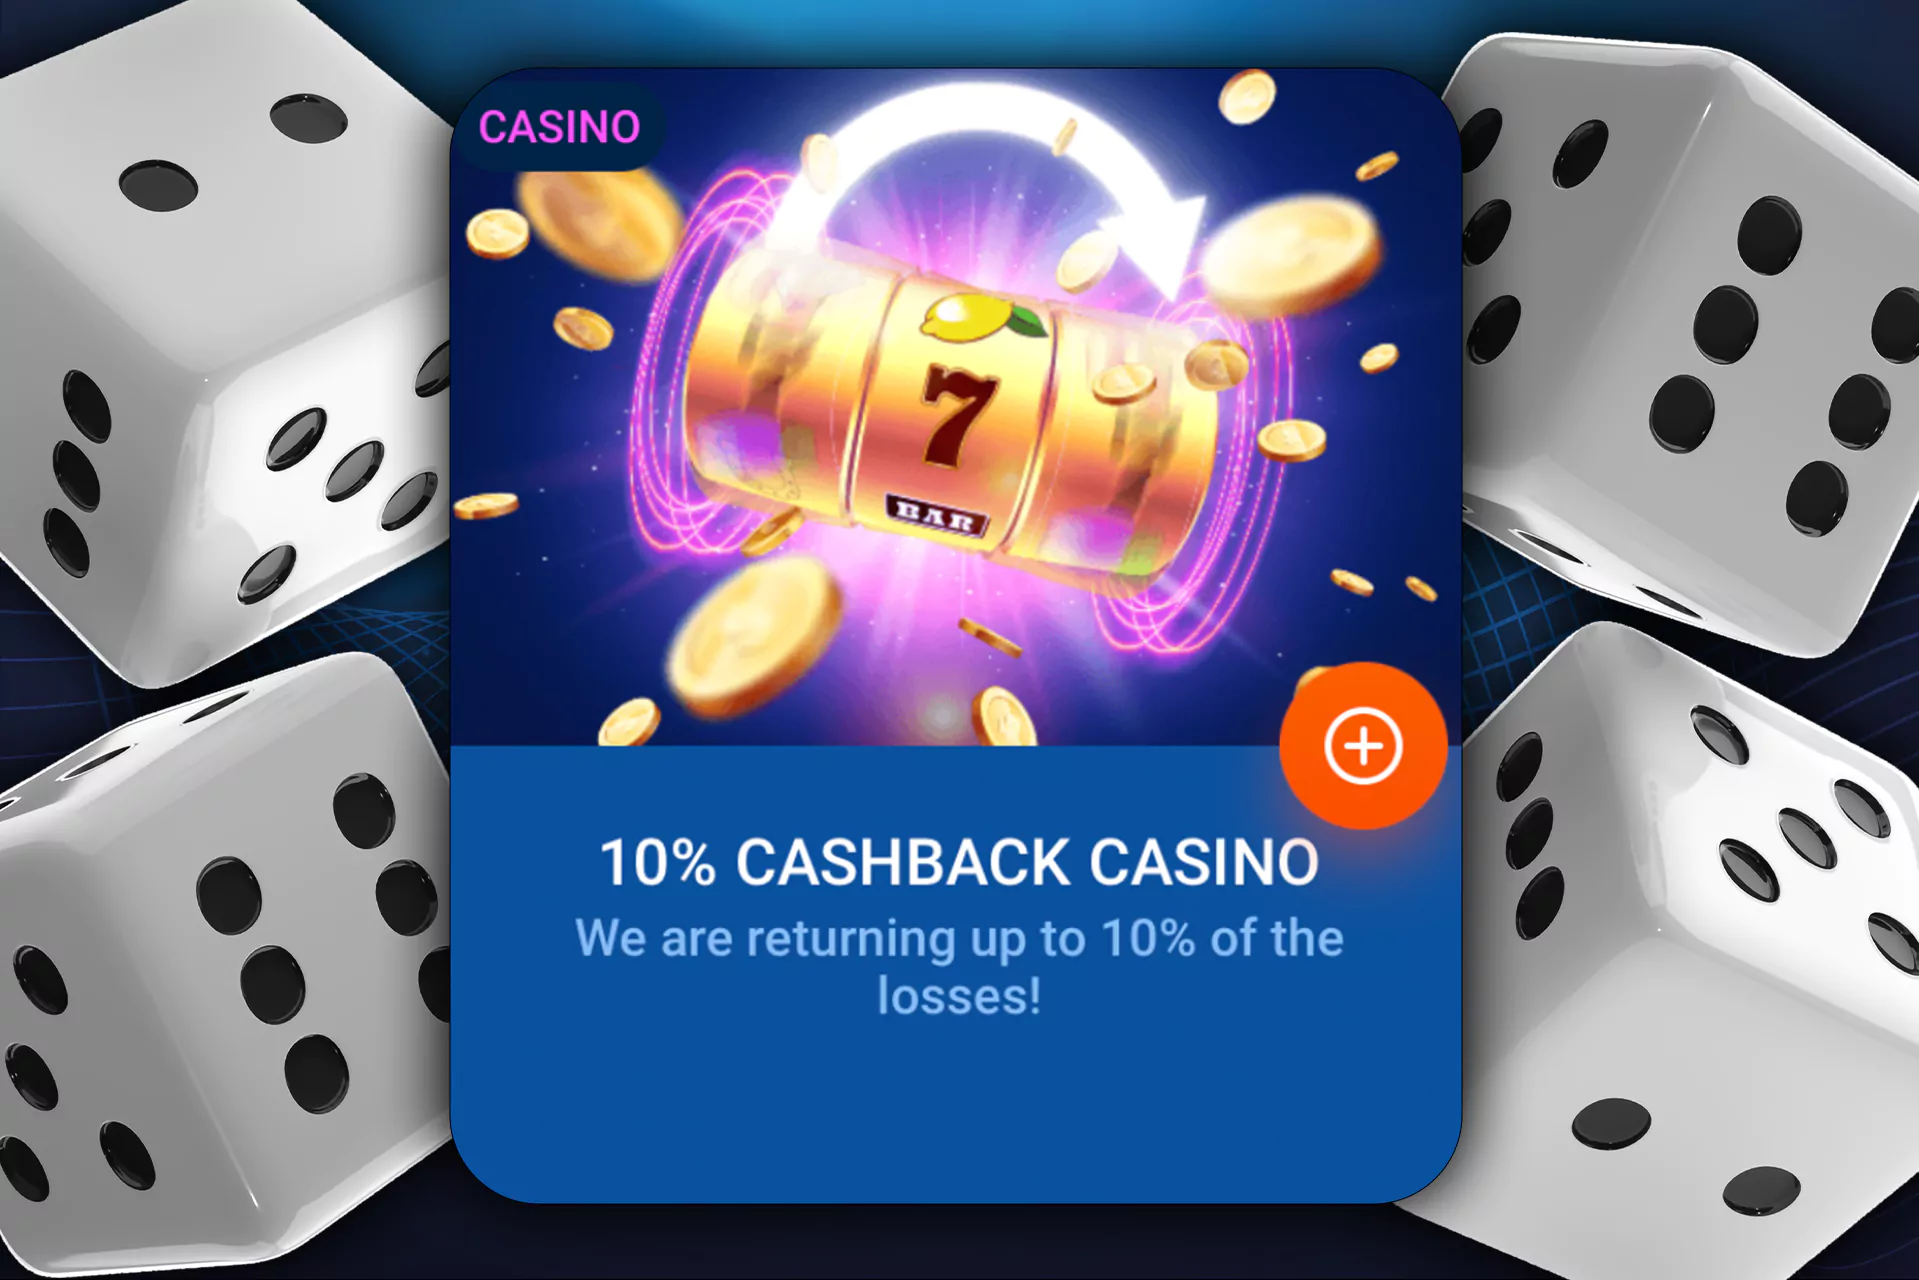 10% chashbak casino: we are returning up to 10% of the losses.